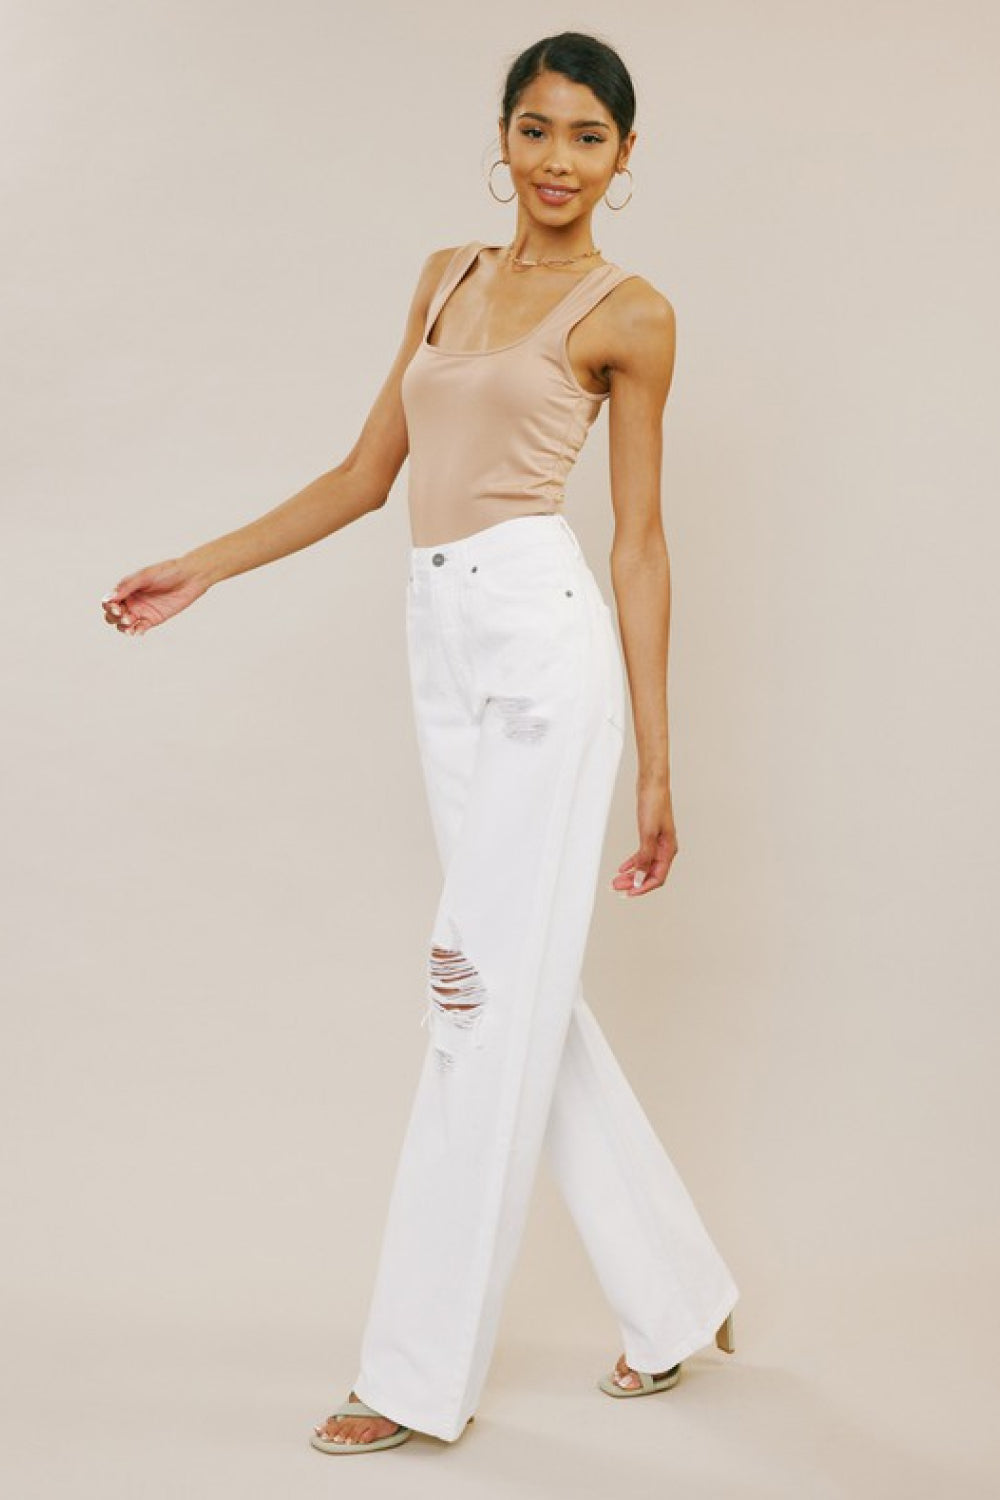 Sophie Kancan High-Rise Distressed Flare Jeans in White- one size 1/24 left! FINAL SALE!